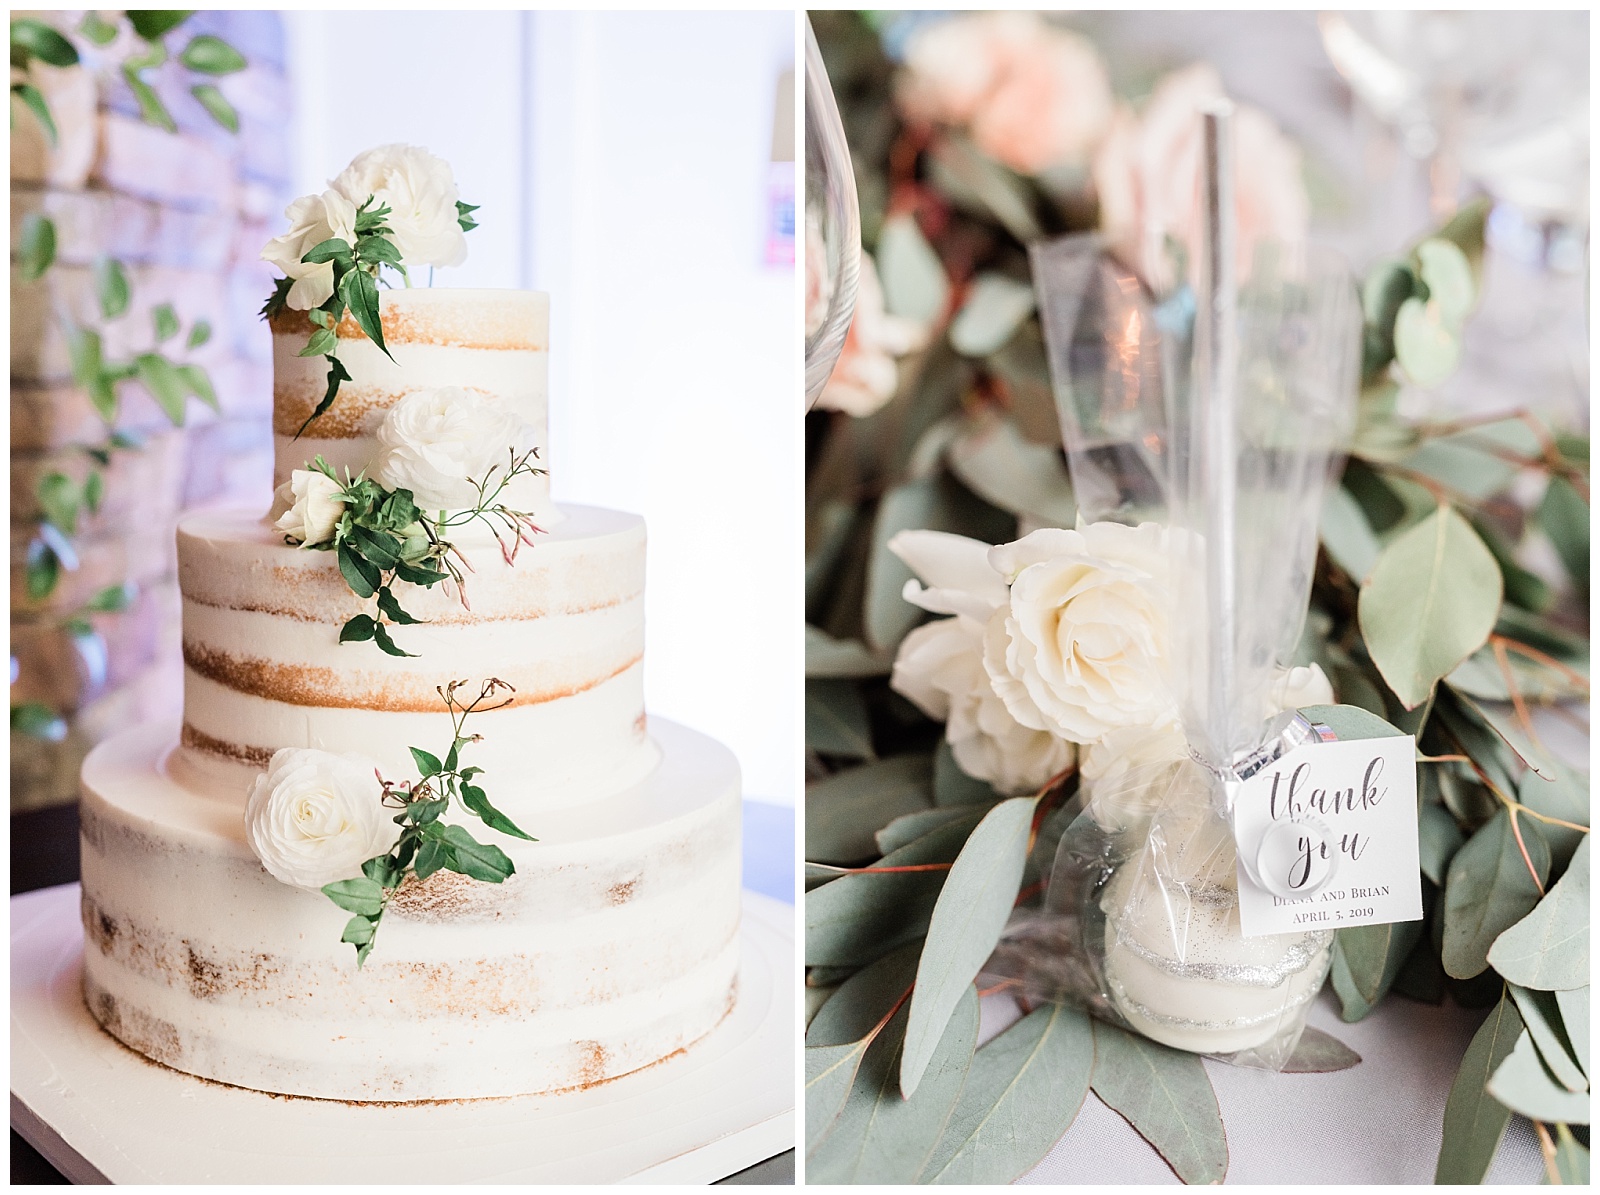 A naked wedding cake adorned with flowers paired with white cake pop favors.